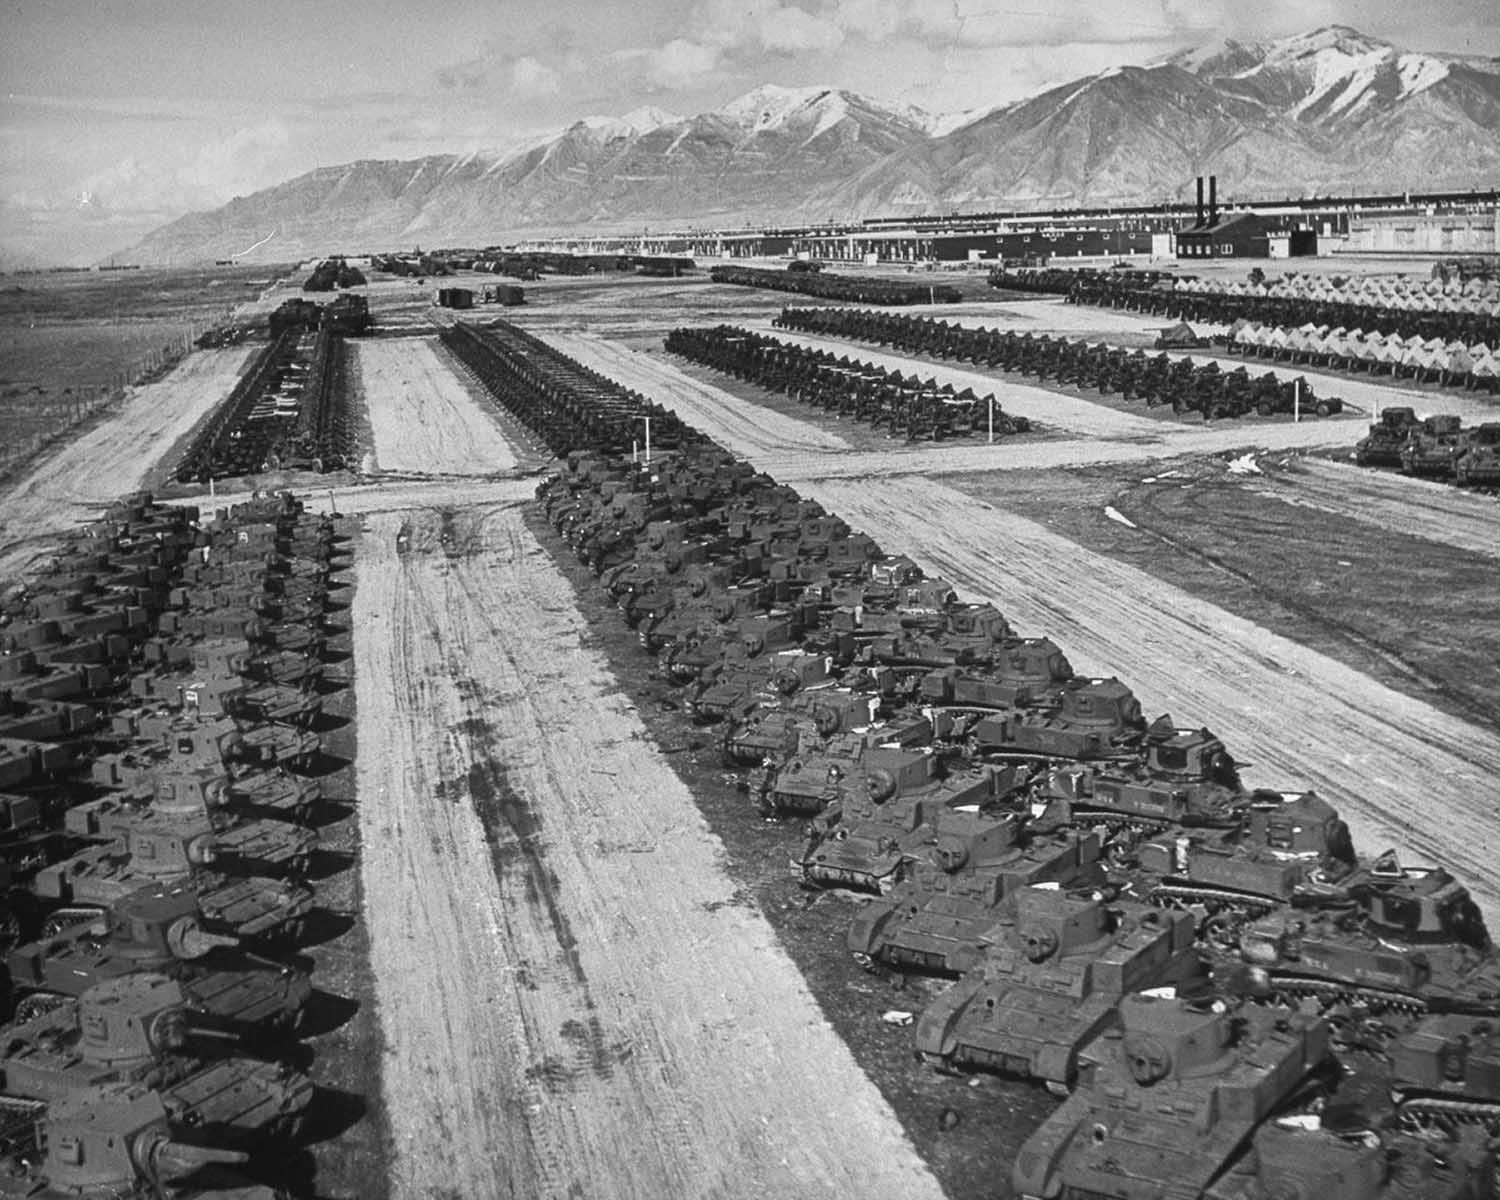 Armored vehicles sit in storage at a U.S. facility, 1946.